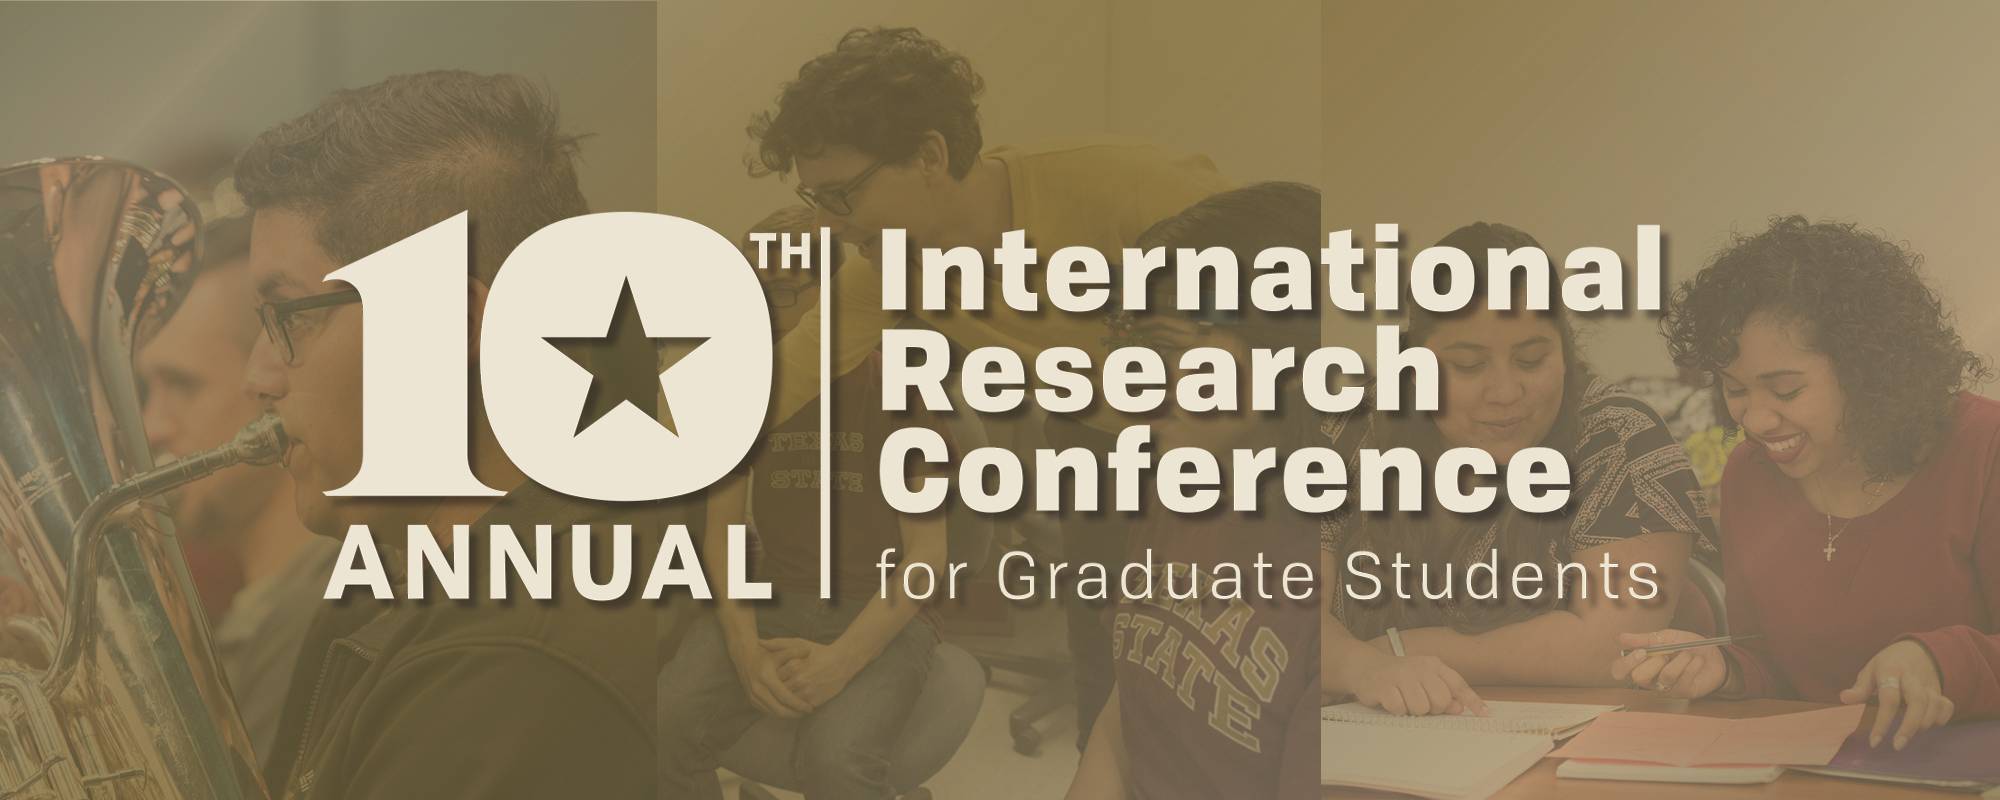 a collage of the following three images: a man playing a horn, a professor leaning over a group of students to point at something on a table, tow women smiling at a piece of paper on a table. The words "10th annual international research conference for graduate students" is inlaid across the image.